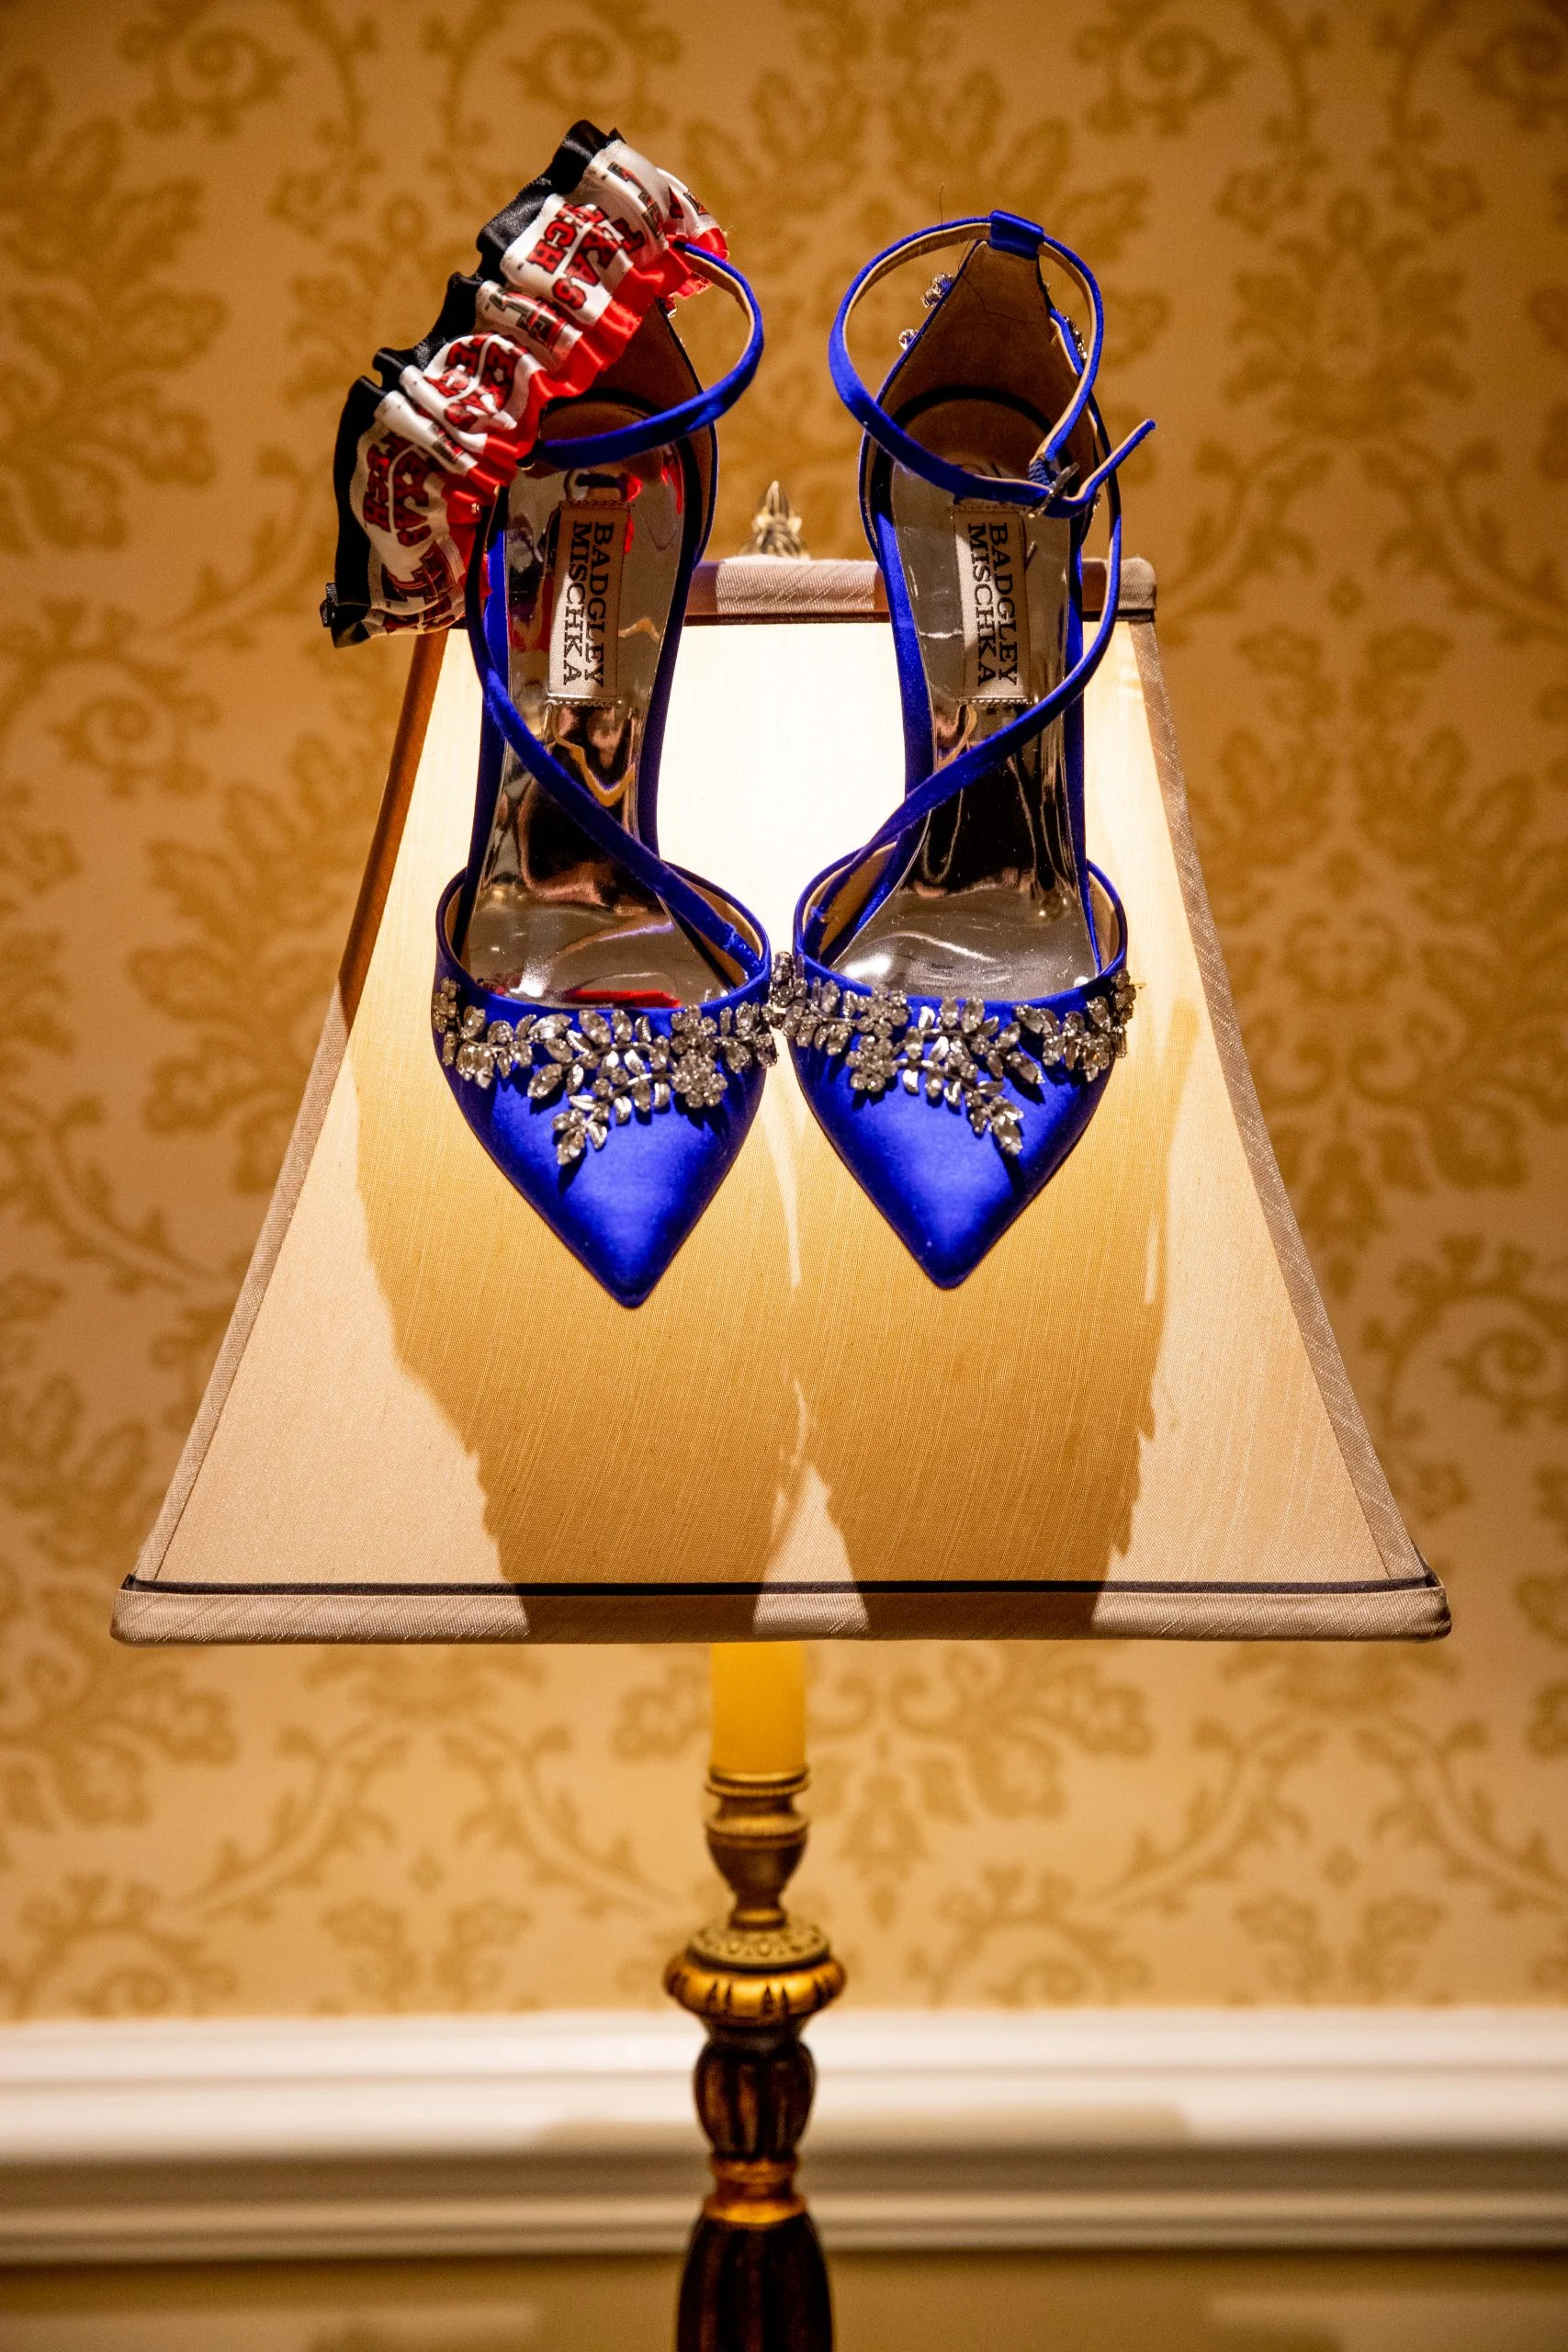 A pair of blue high heeled shoes on a lamp.